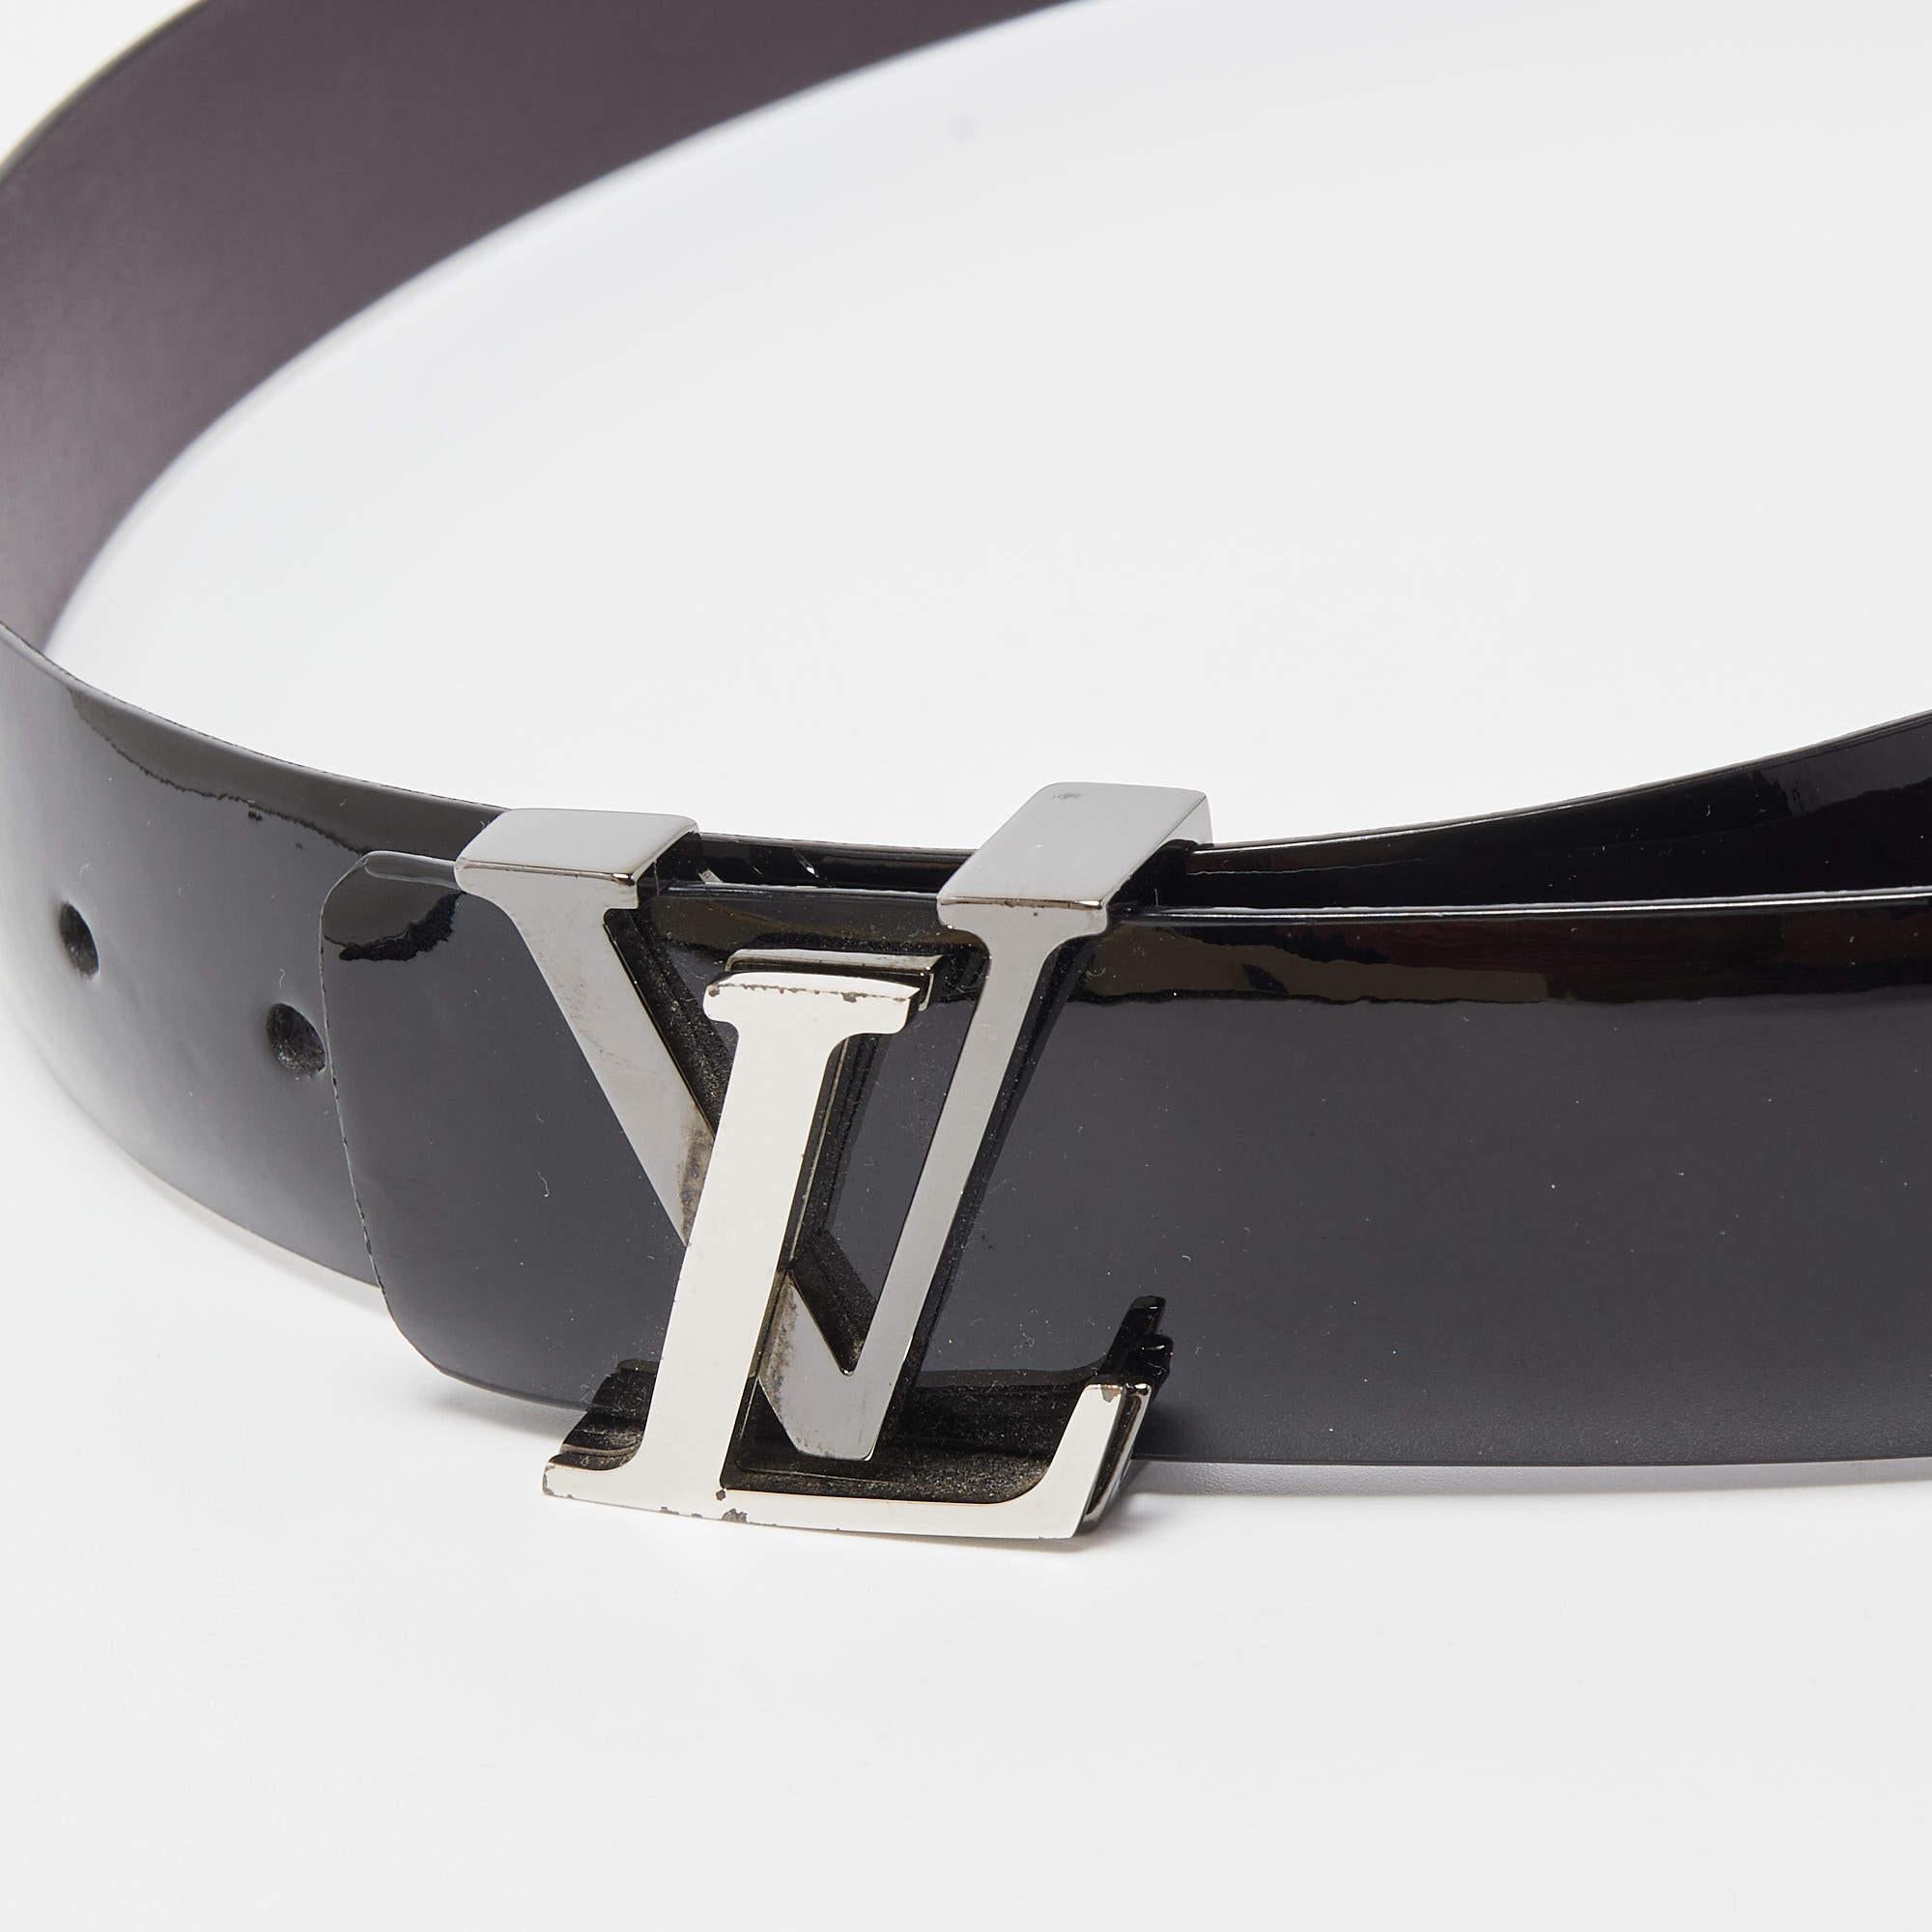 The Louis Vuitton LV Initiales belt is a luxurious fashion accessory crafted from glossy black Vernis patent leather. It features the iconic LV initials as a prominent buckle, making it a statement piece that adds sophistication and style to any